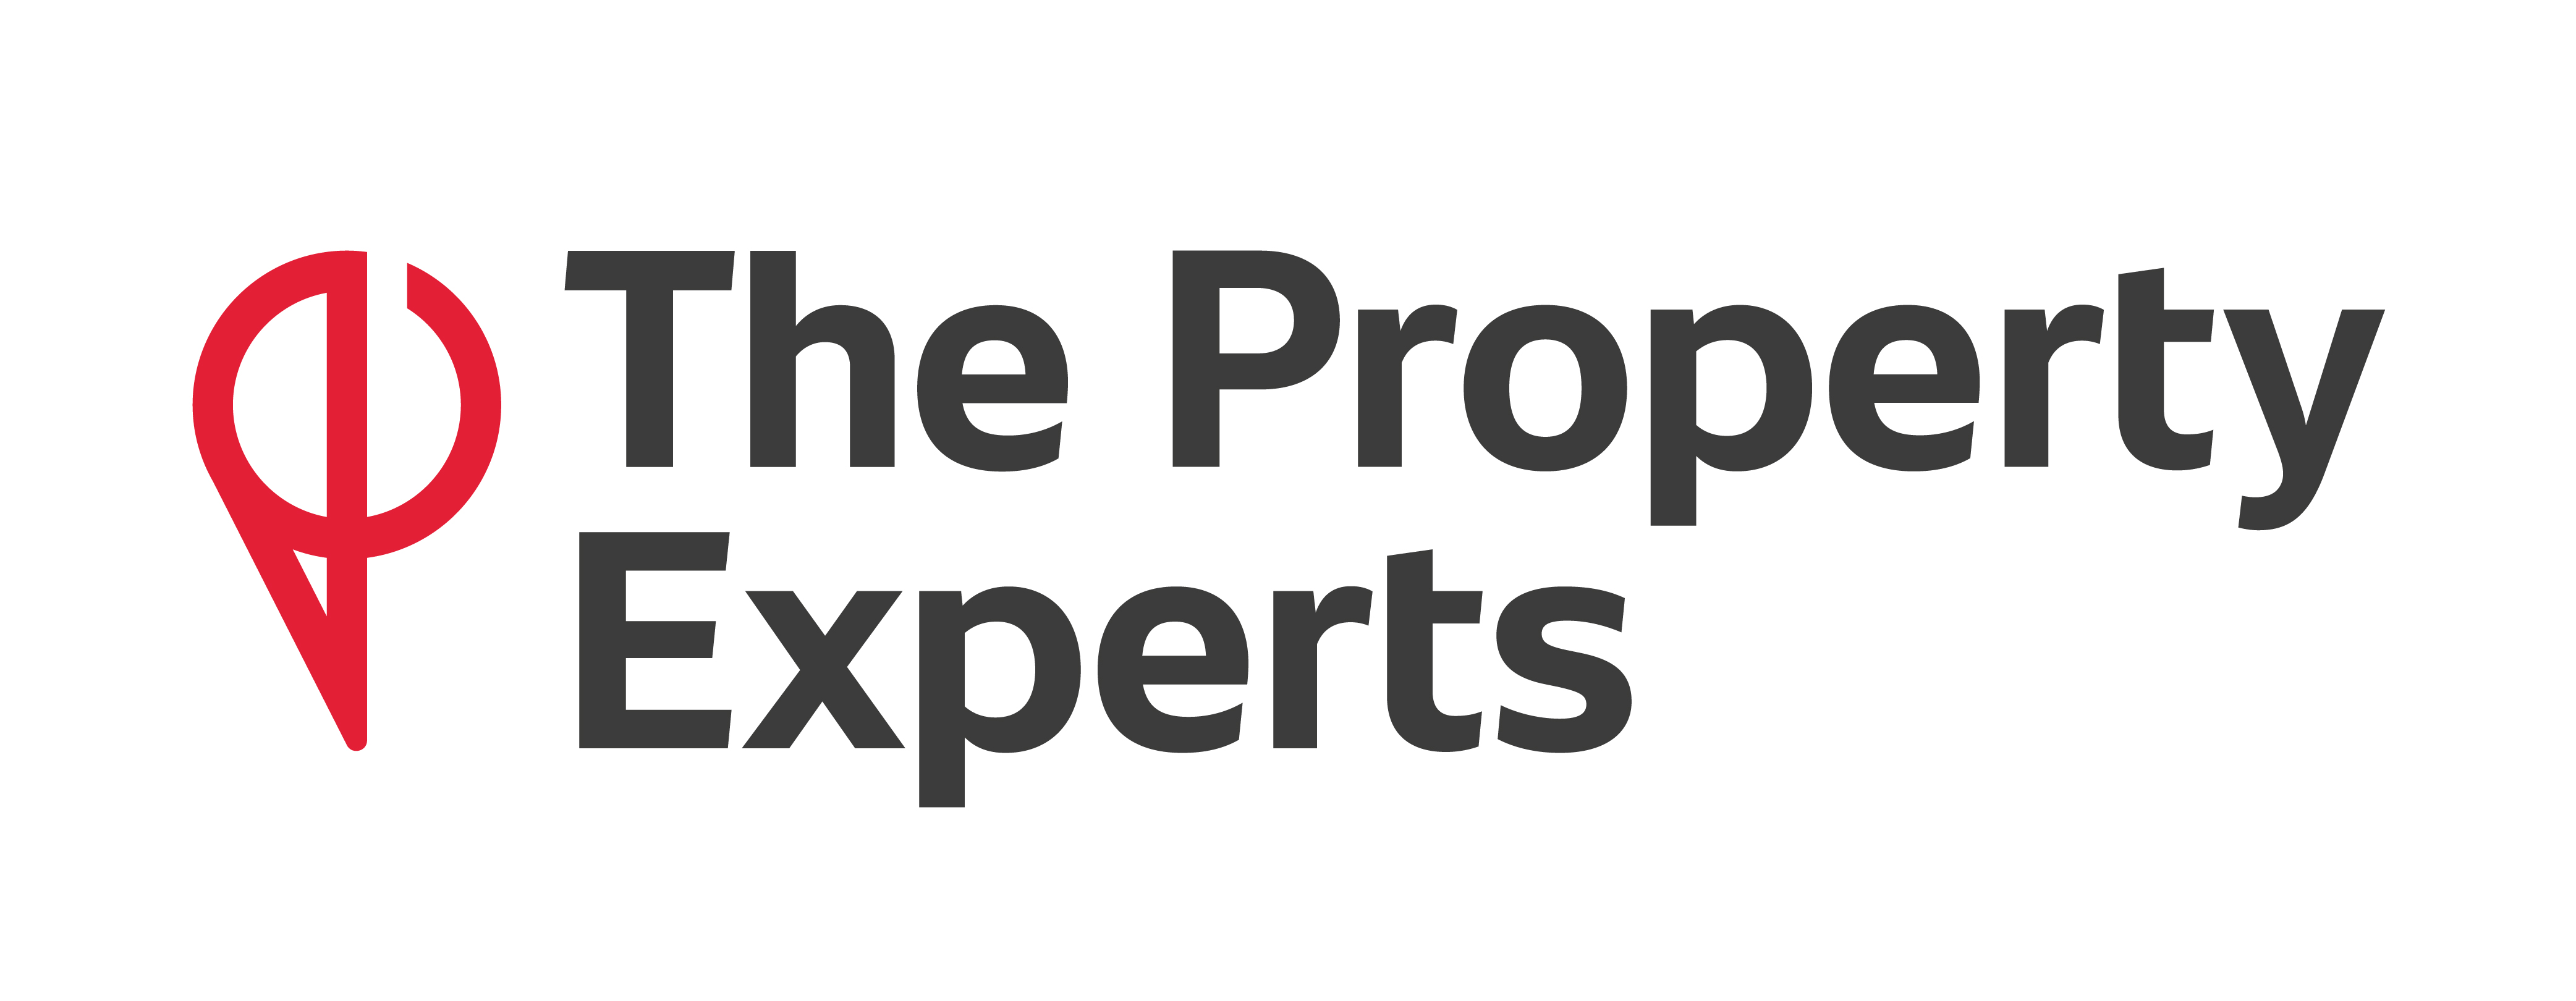 The Property Experts